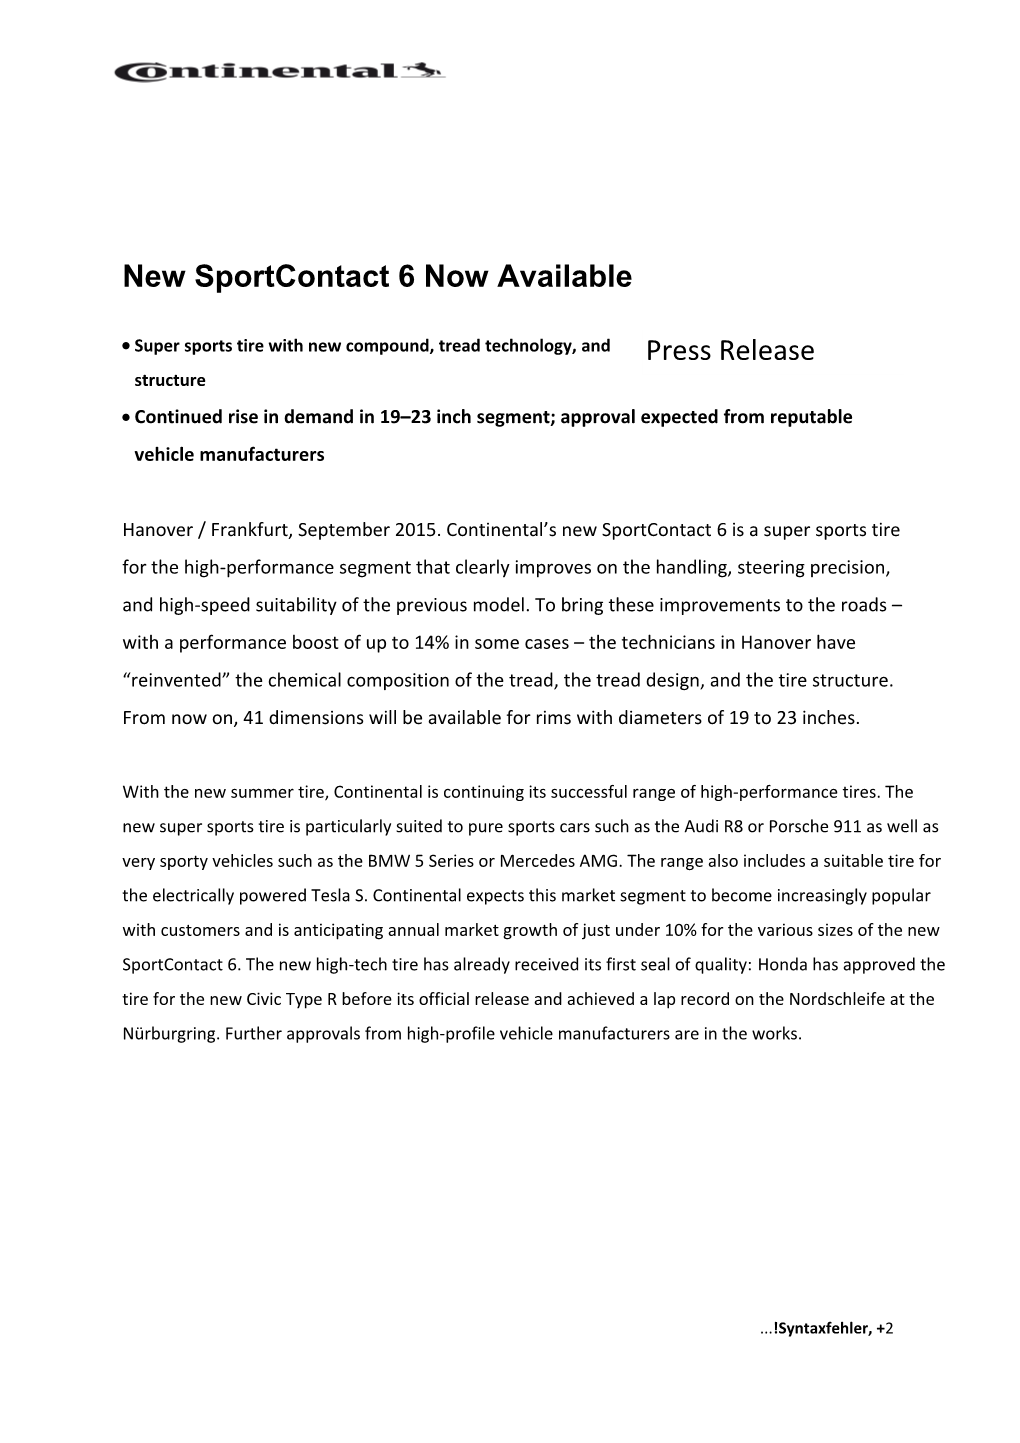 New Sportcontact 6 Now Available s1